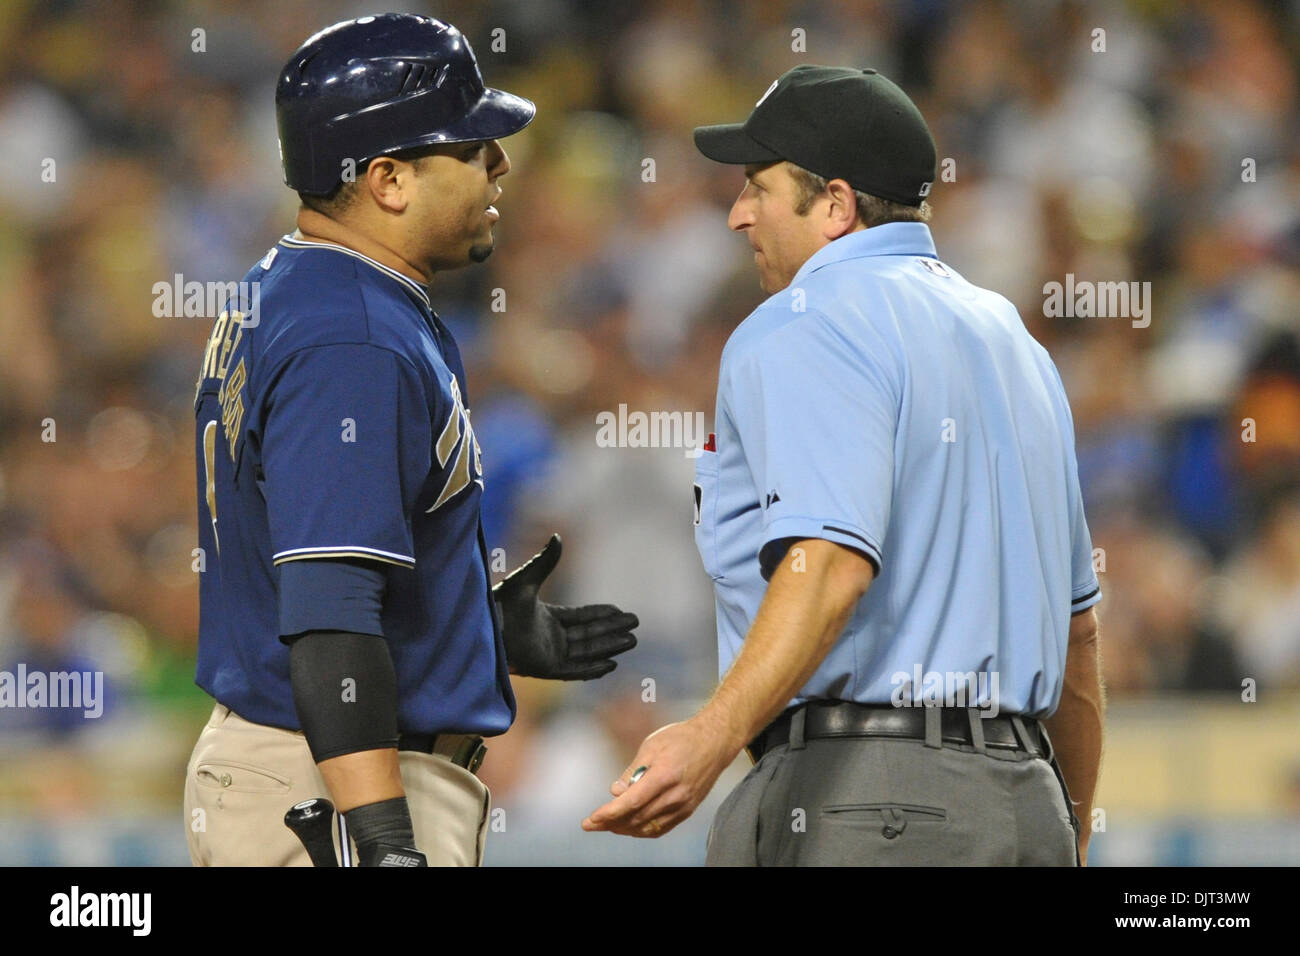 May 20, 2010 - Los Angeles, California, U.S - 20 May 2010:  San Diego Padres catcher Yorvit Torrealba (8) argues with home plate umpire Chris Guccione after being called out on strikes. The Los Angeles Dodgers defeated the San Diego Padres by a score of 4-1, at Dodger Stadium in Los Angeles, California..Mandatory Credit: Andrew Fielding / Southcreek Global (Credit Image: © Andrew F Stock Photo